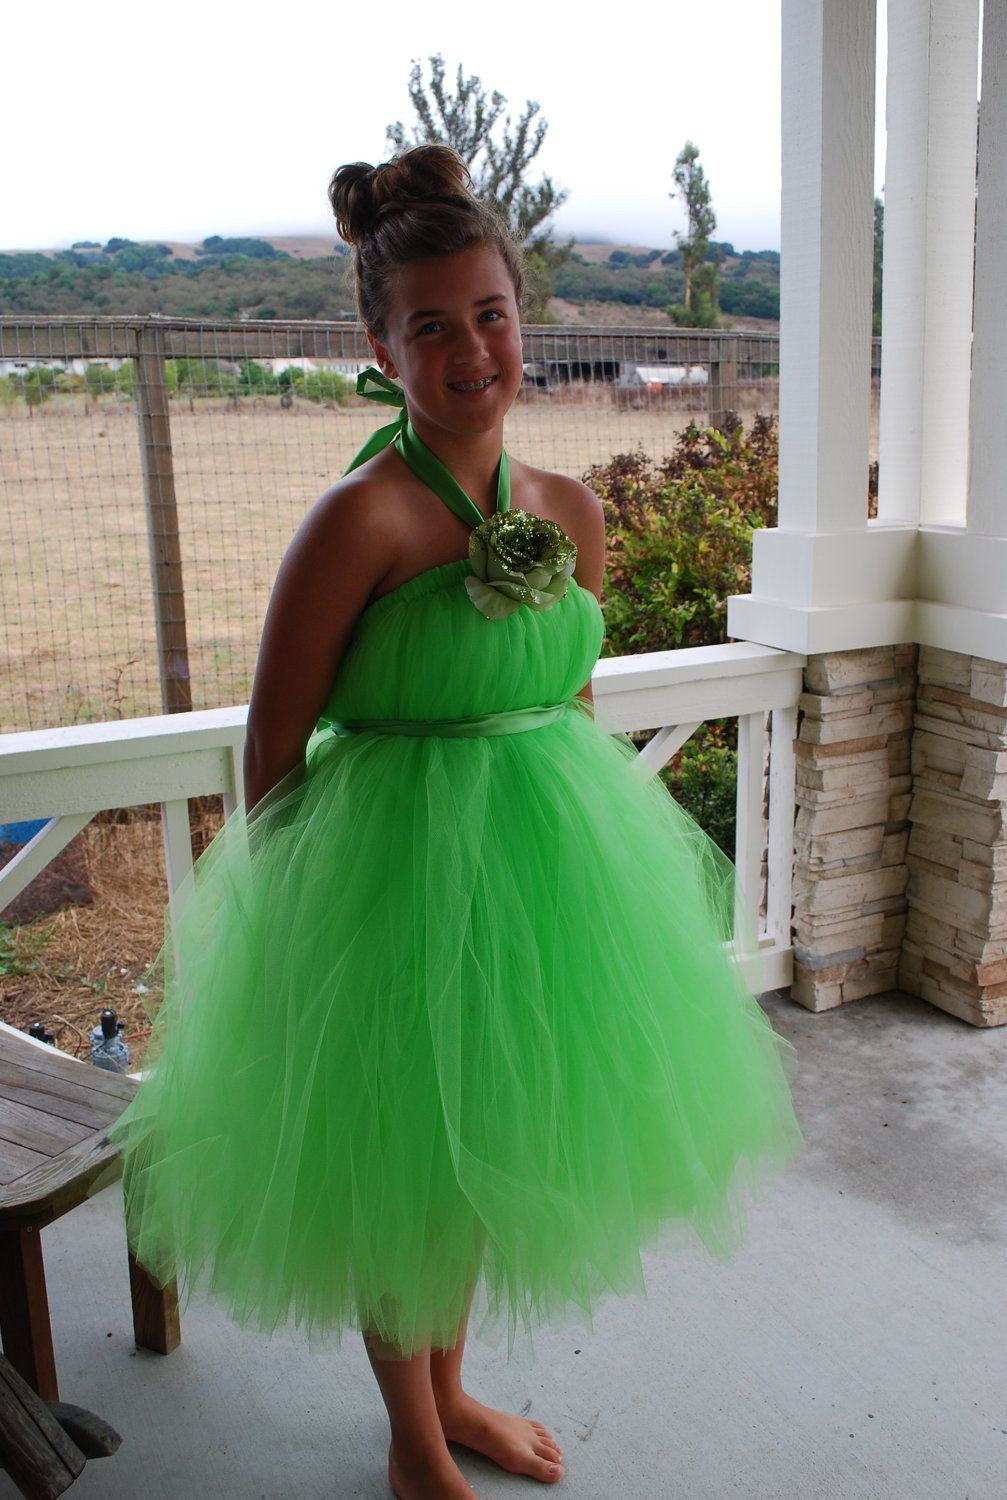 DIY Tinkerbell Costume For Adults
 Adult or Teen Tinkerbell Tutu Dress via Etsy Could make